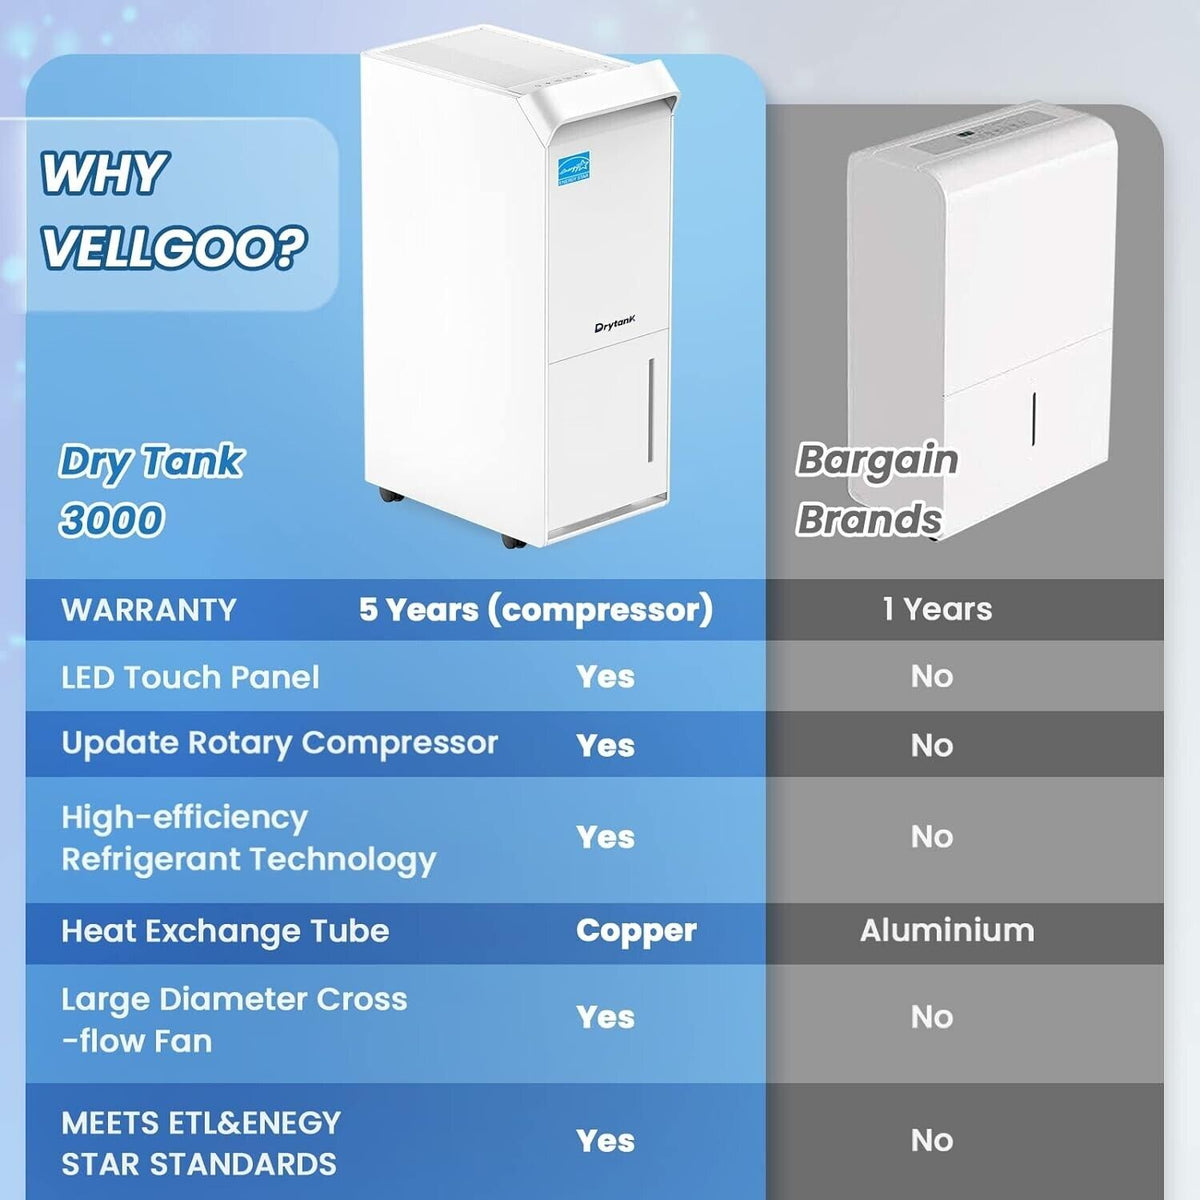 Vellgoo Dehumidifier for Large Room or Basements, Up to 4500 Sq.Ft